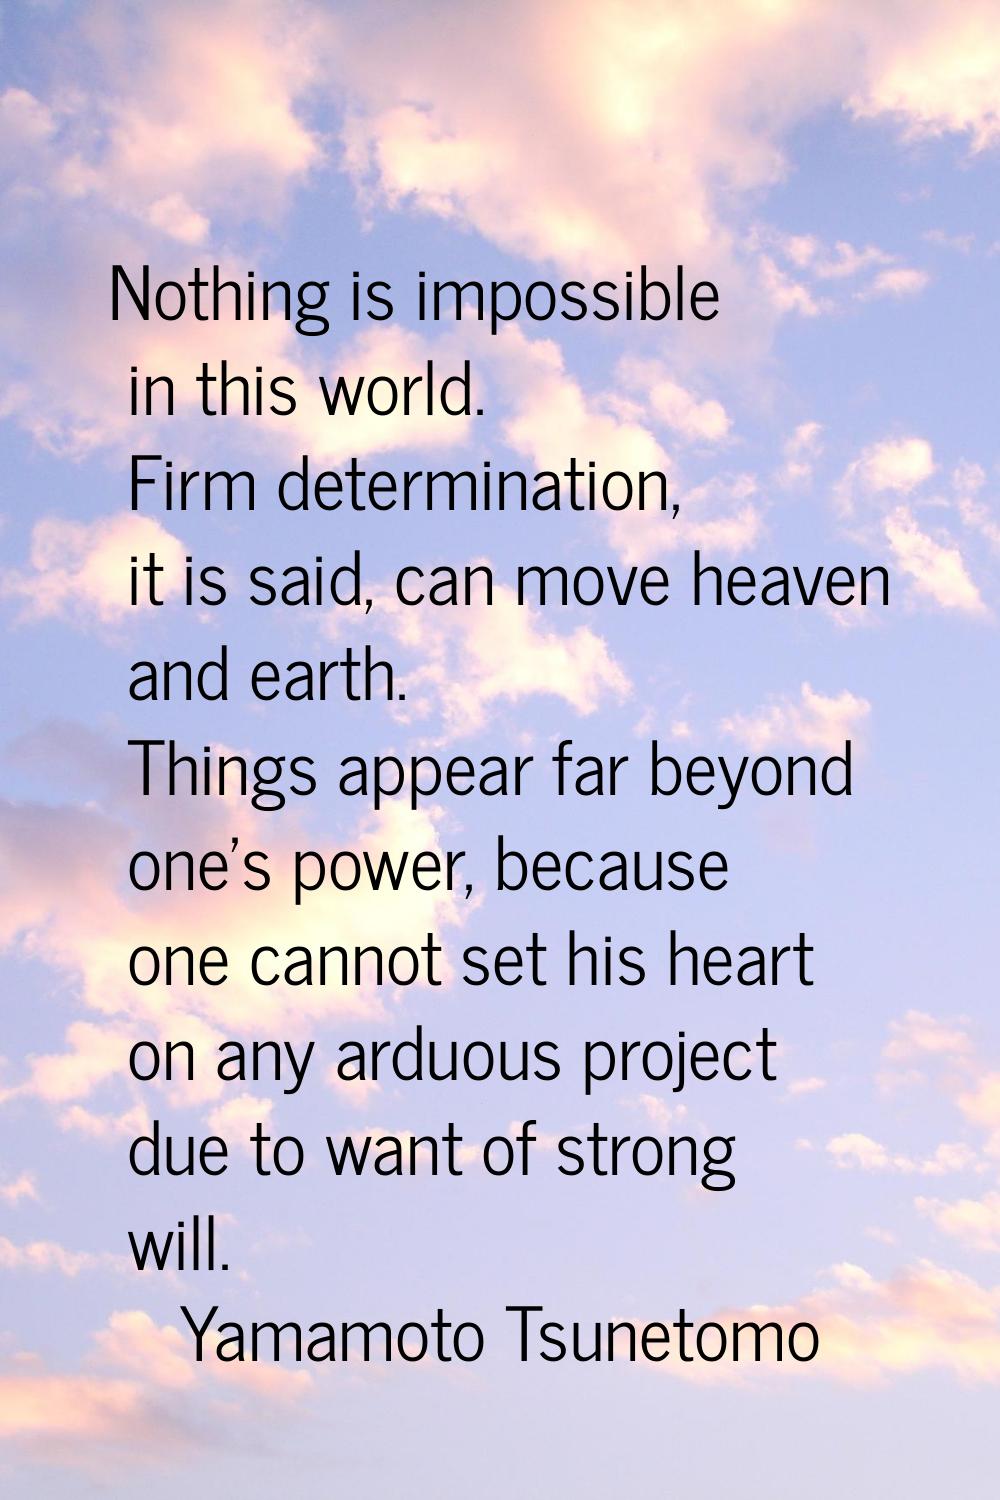 Nothing is impossible in this world. Firm determination, it is said, can move heaven and earth. Thi